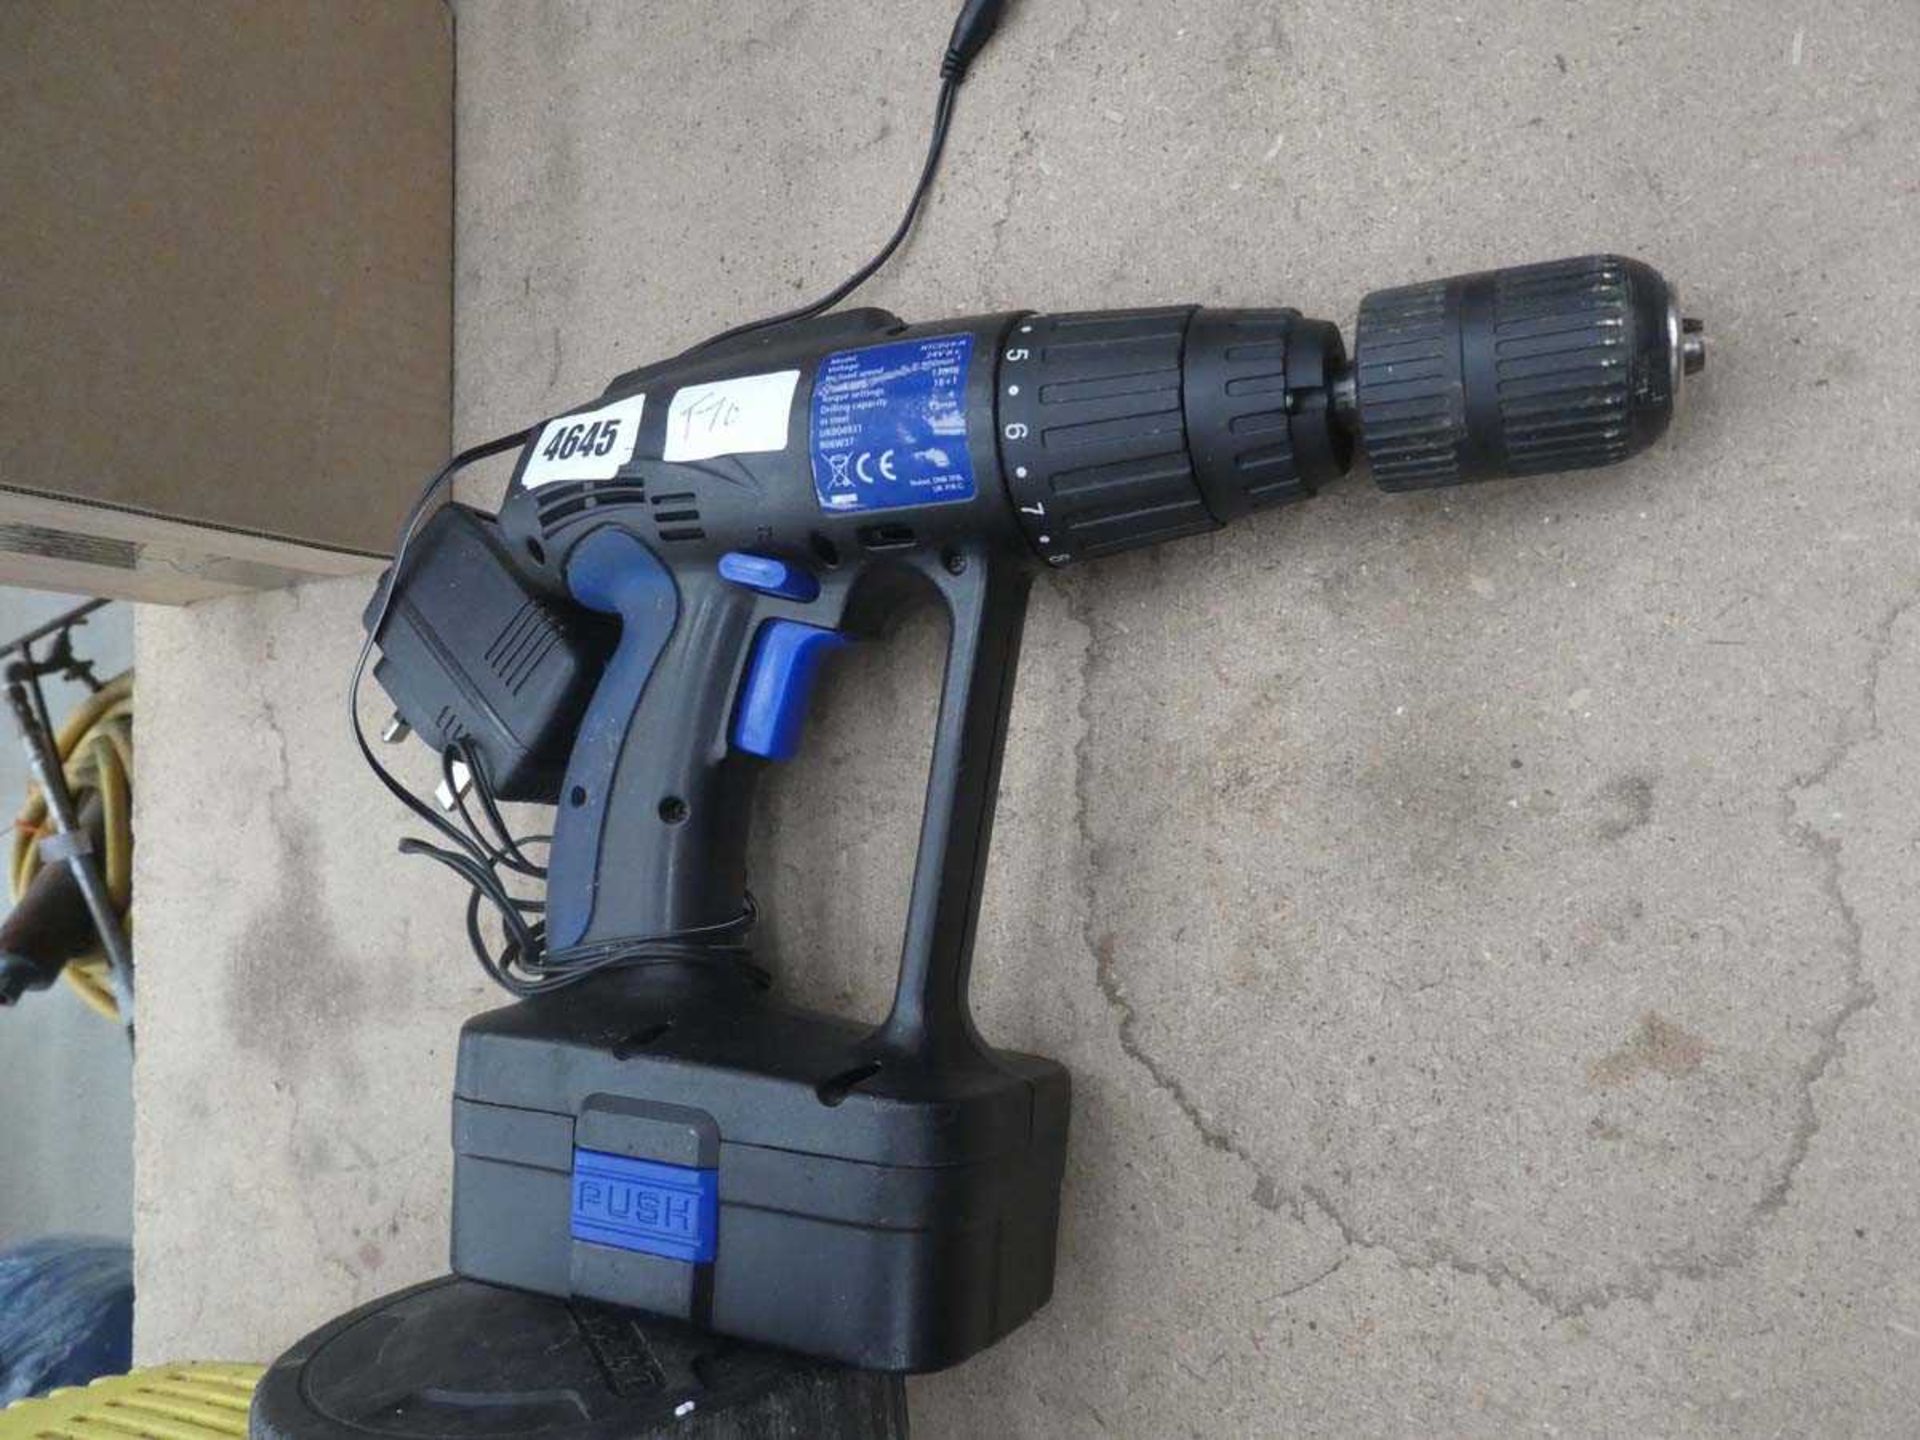 Nutool battery drill, 1x battery and charger